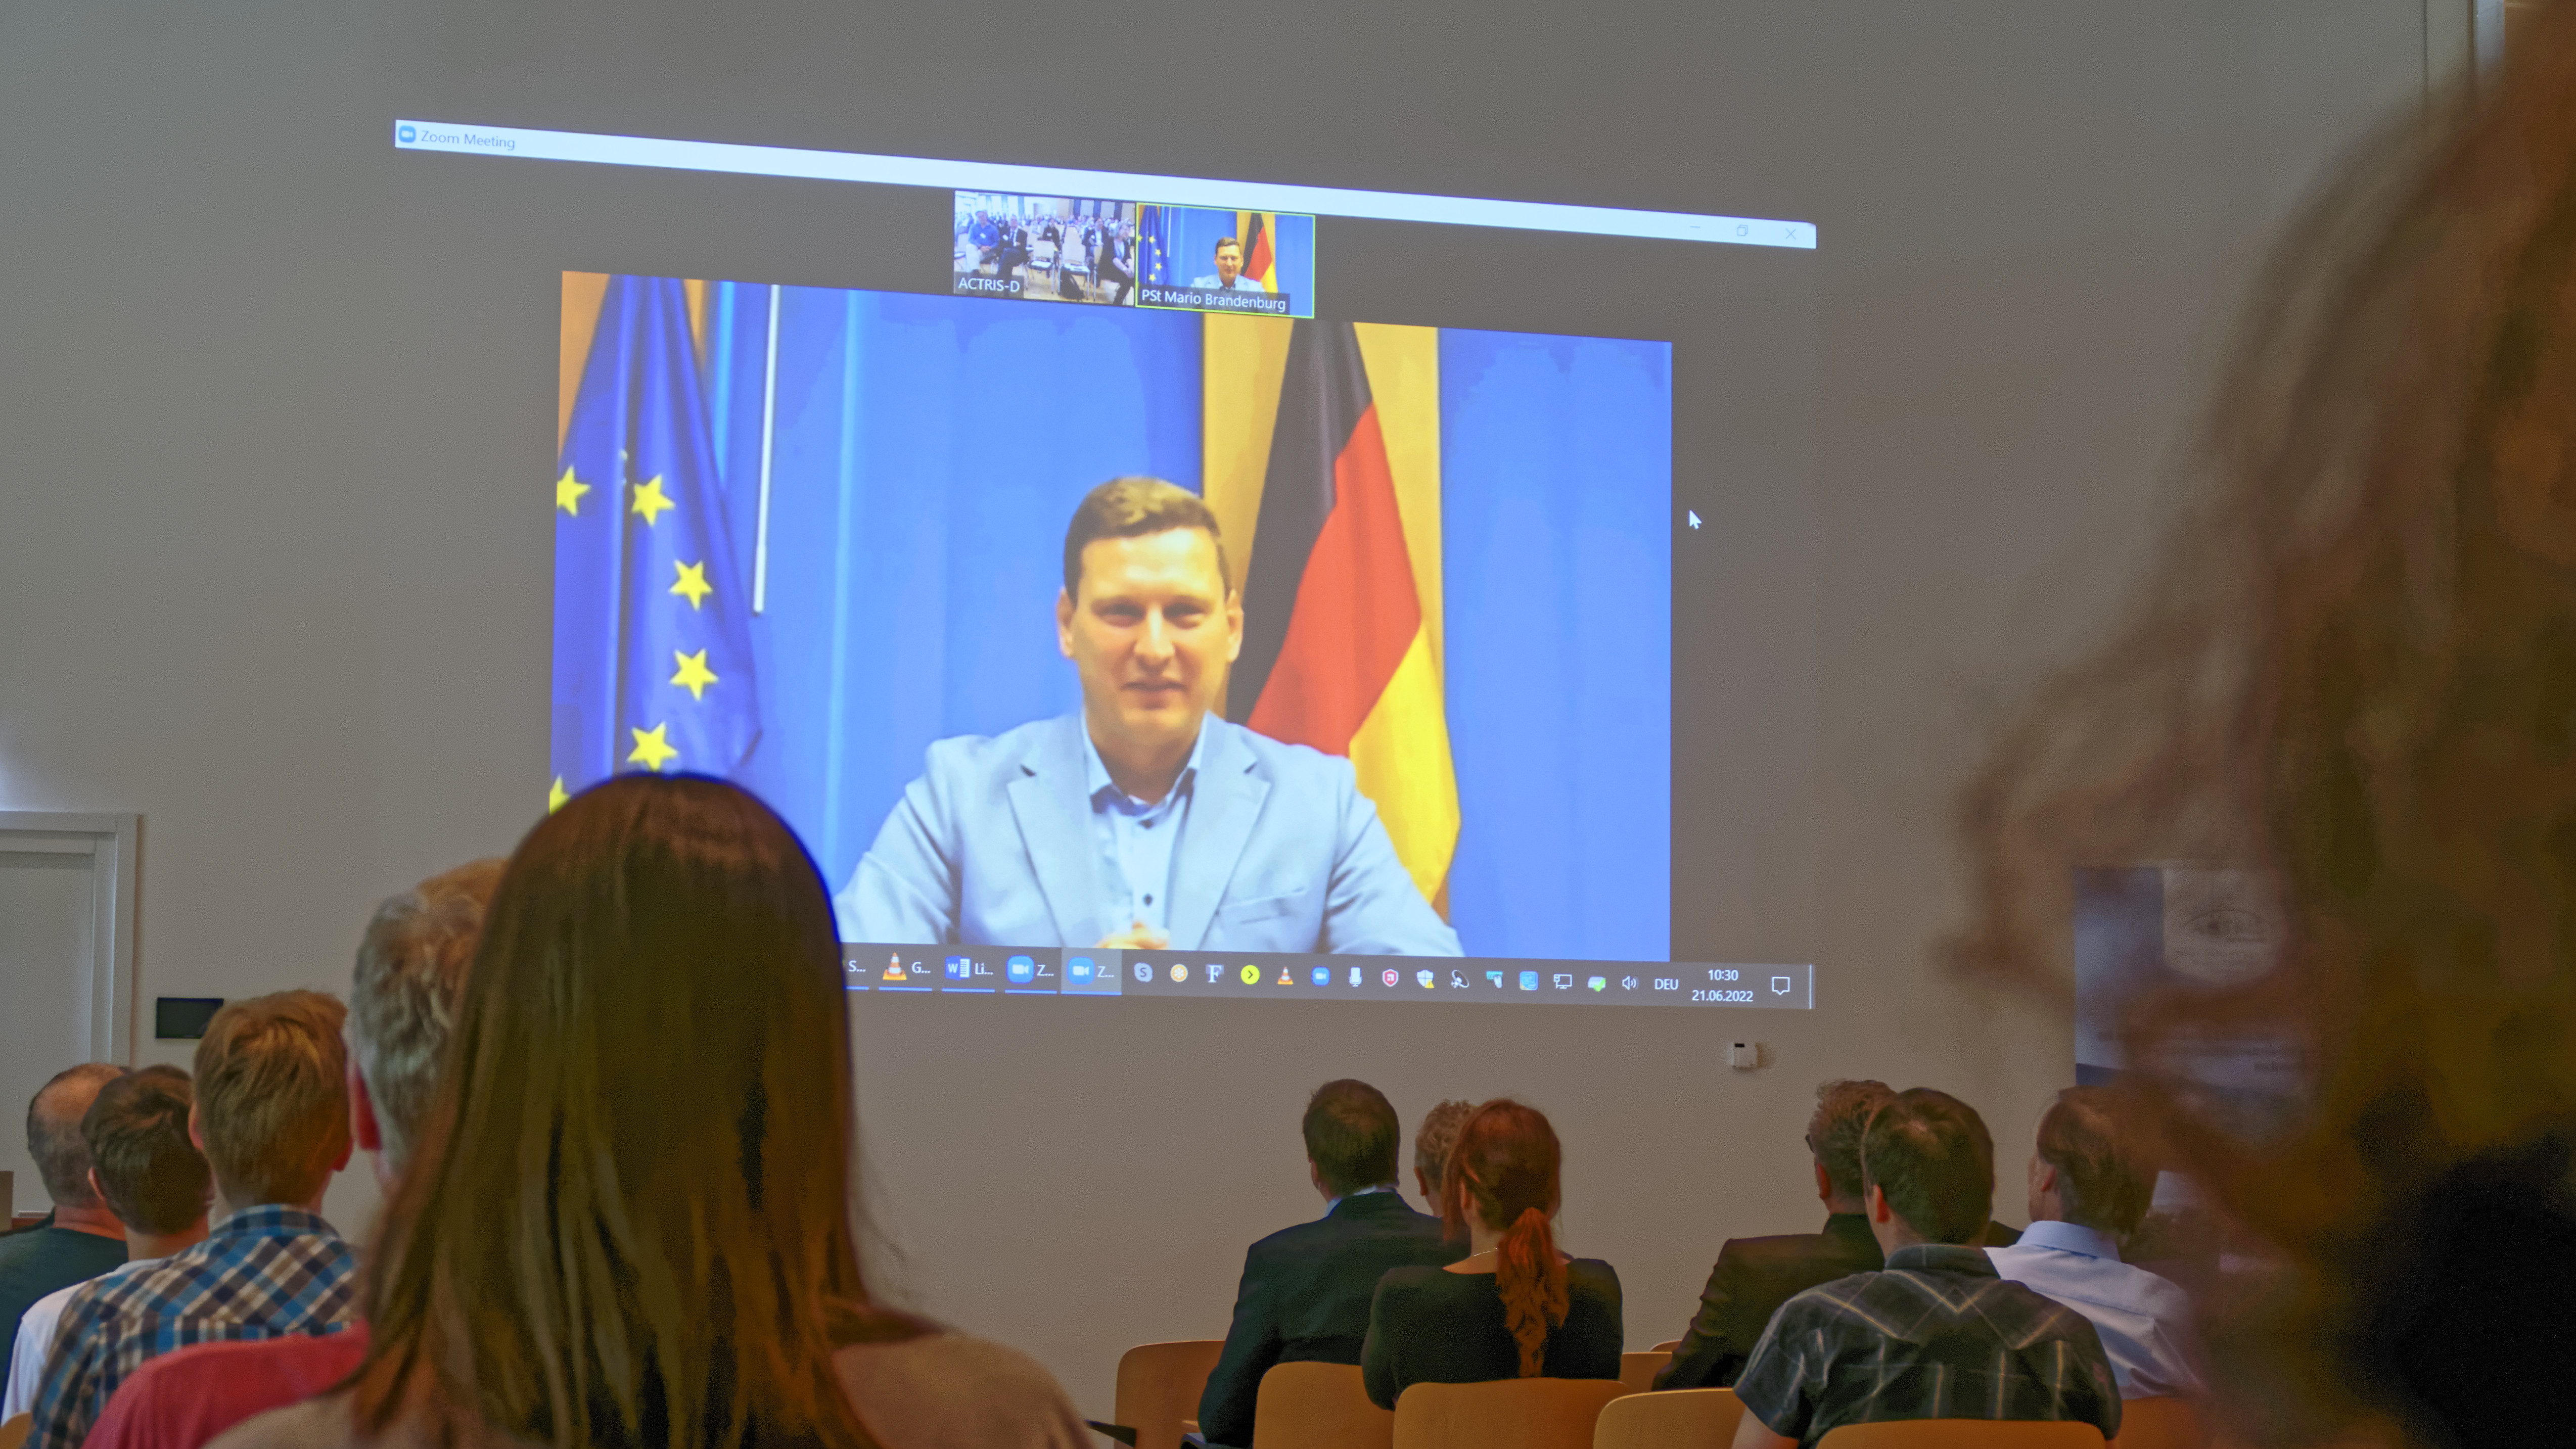 Mario Brandenburg, Parliamentary State Secretary at the Federal Ministry of Education and Research, welcomed the participants per video link.